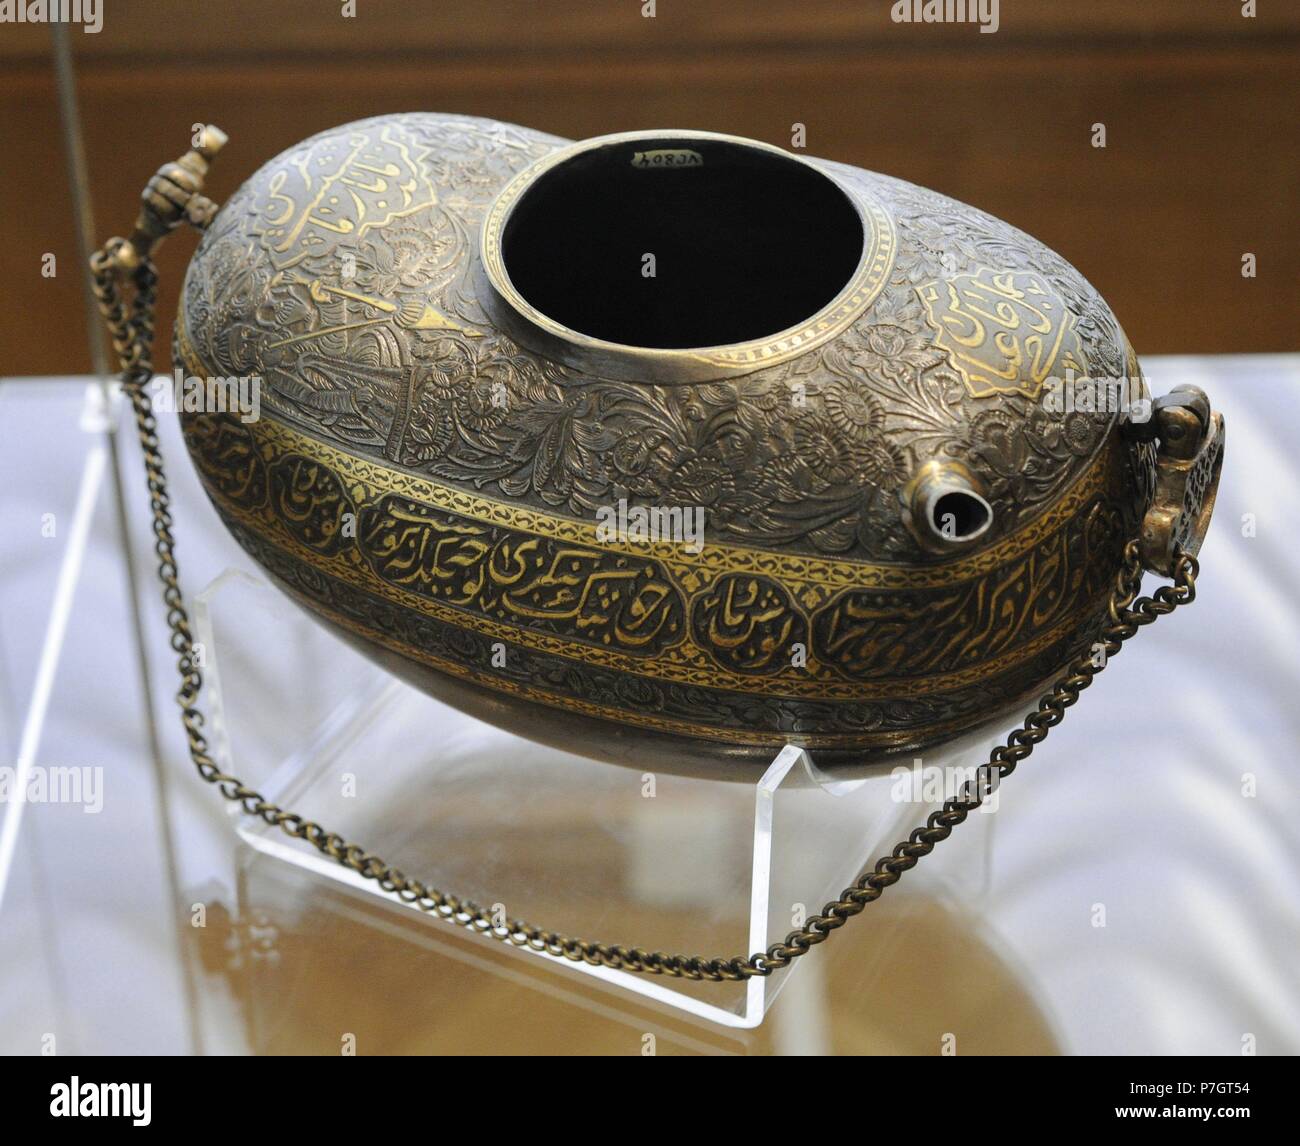 Islam. Near East. Persia. Kashkul (begging bowl for a Dervish). Steel; casting, carving, gilding. Iran, Late 19th- early 20th century. By Hajji 'Abbas (?). The State Hermitage Museum. Saint Petersburg. Russia. Stock Photo